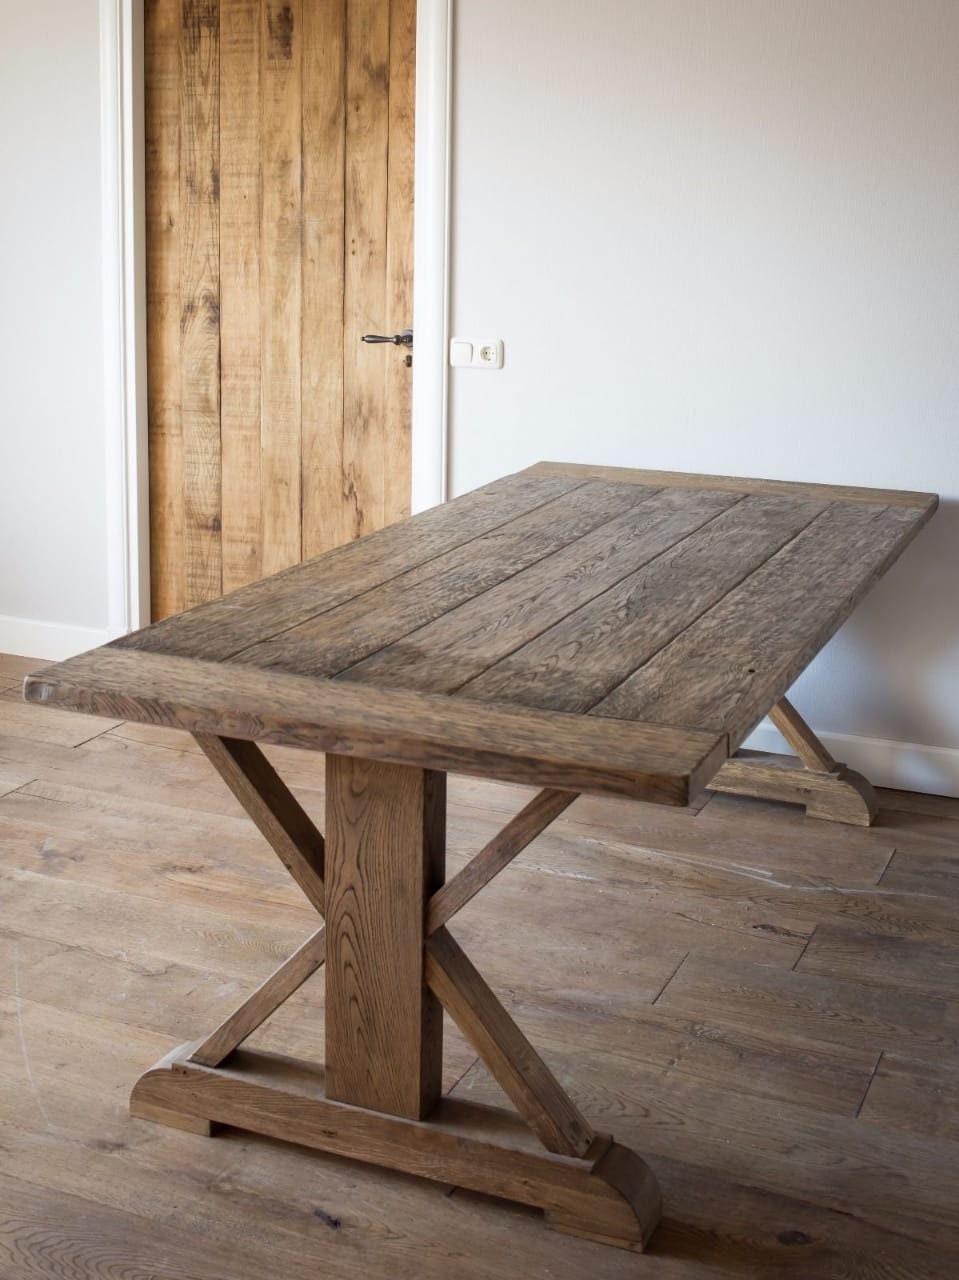 Rustic Dining/ Coffee Table with Bench